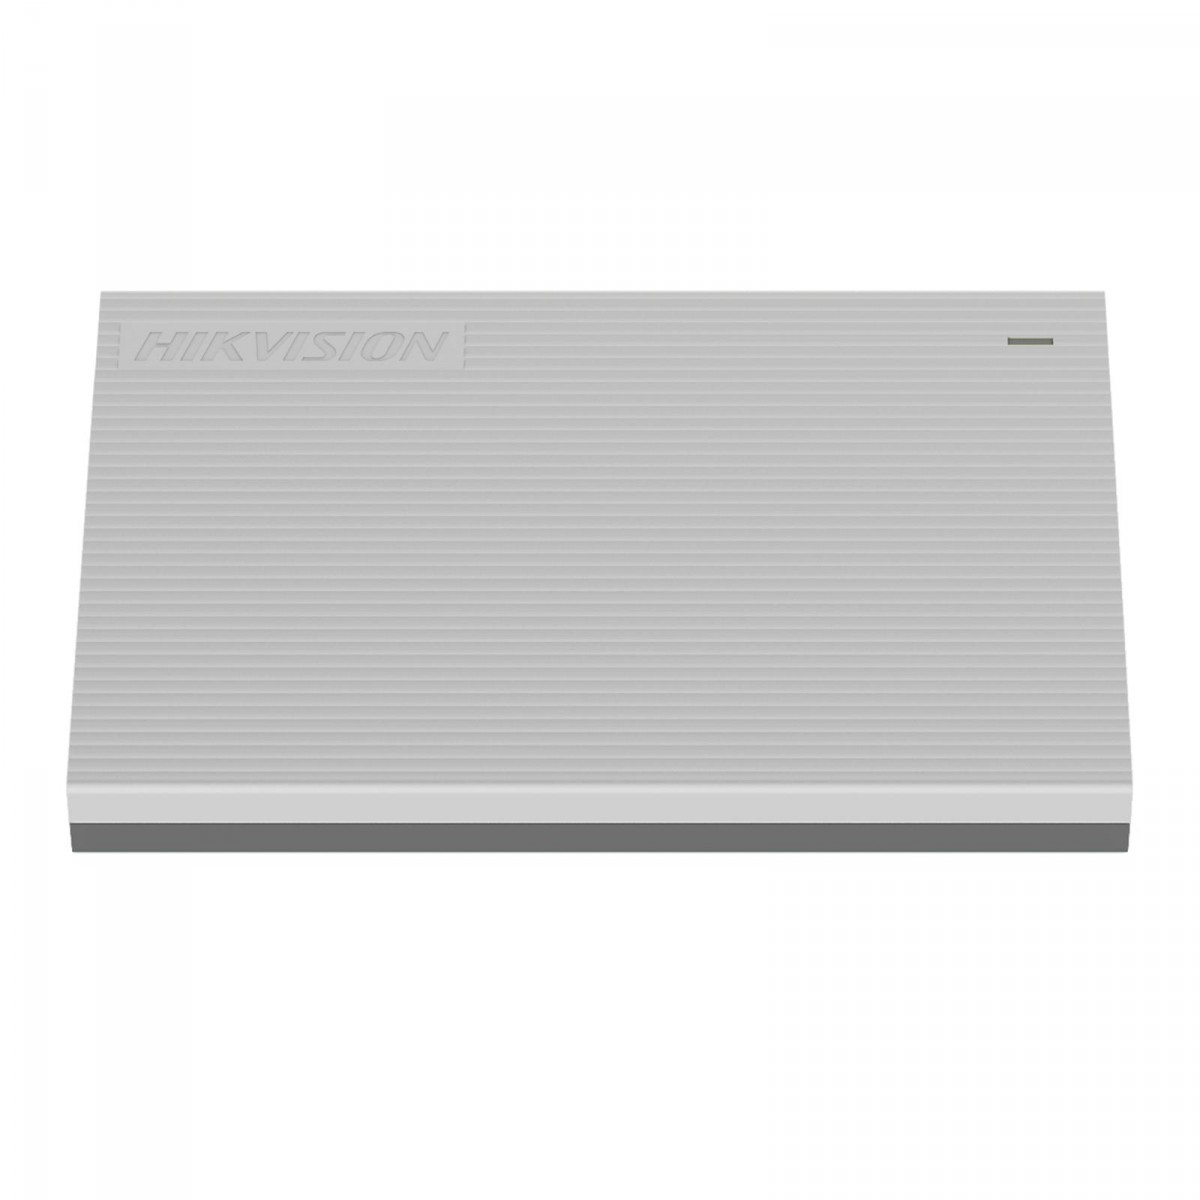 HD Externo Hikvision T30, 2TB, USB 3.0, Gray, HS-EHDD-T30-2T-GRAY